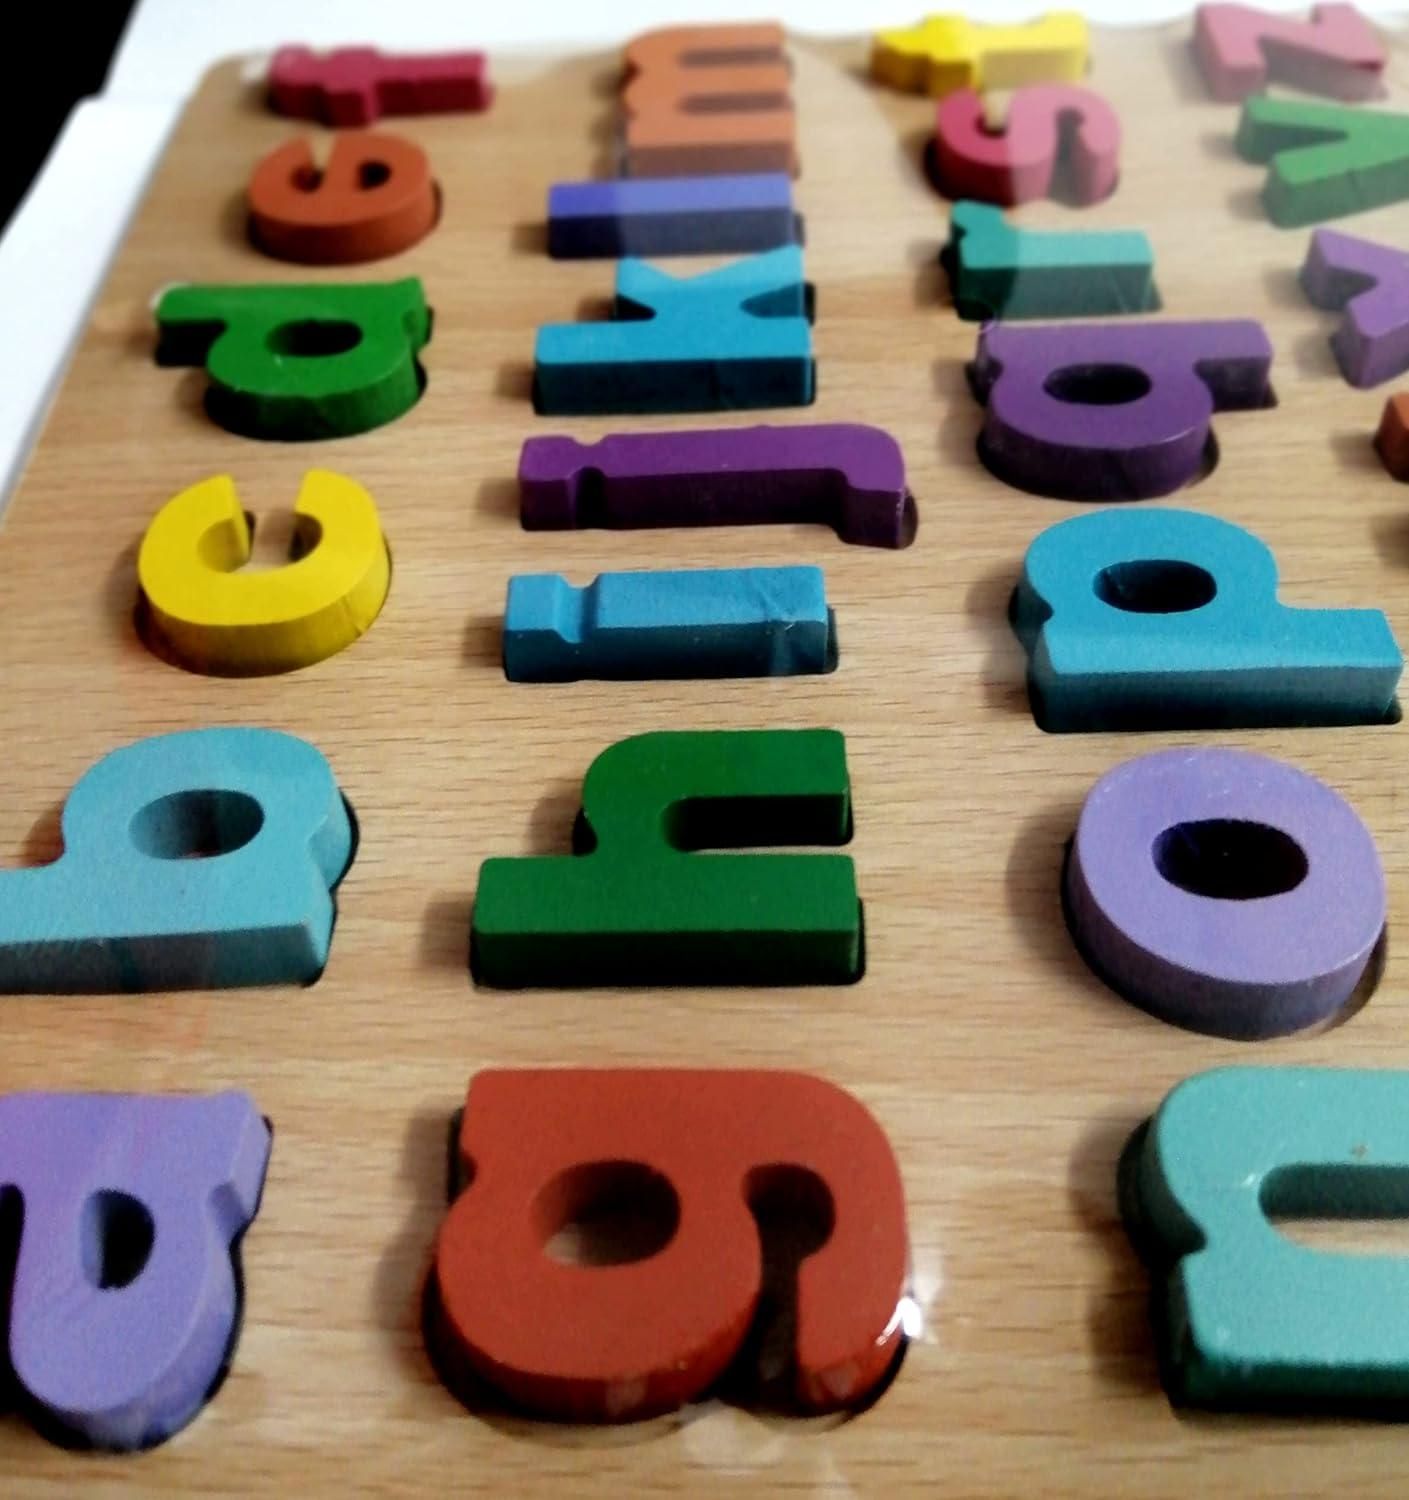 English Alphabets and Color Learning Educational Board for Kids